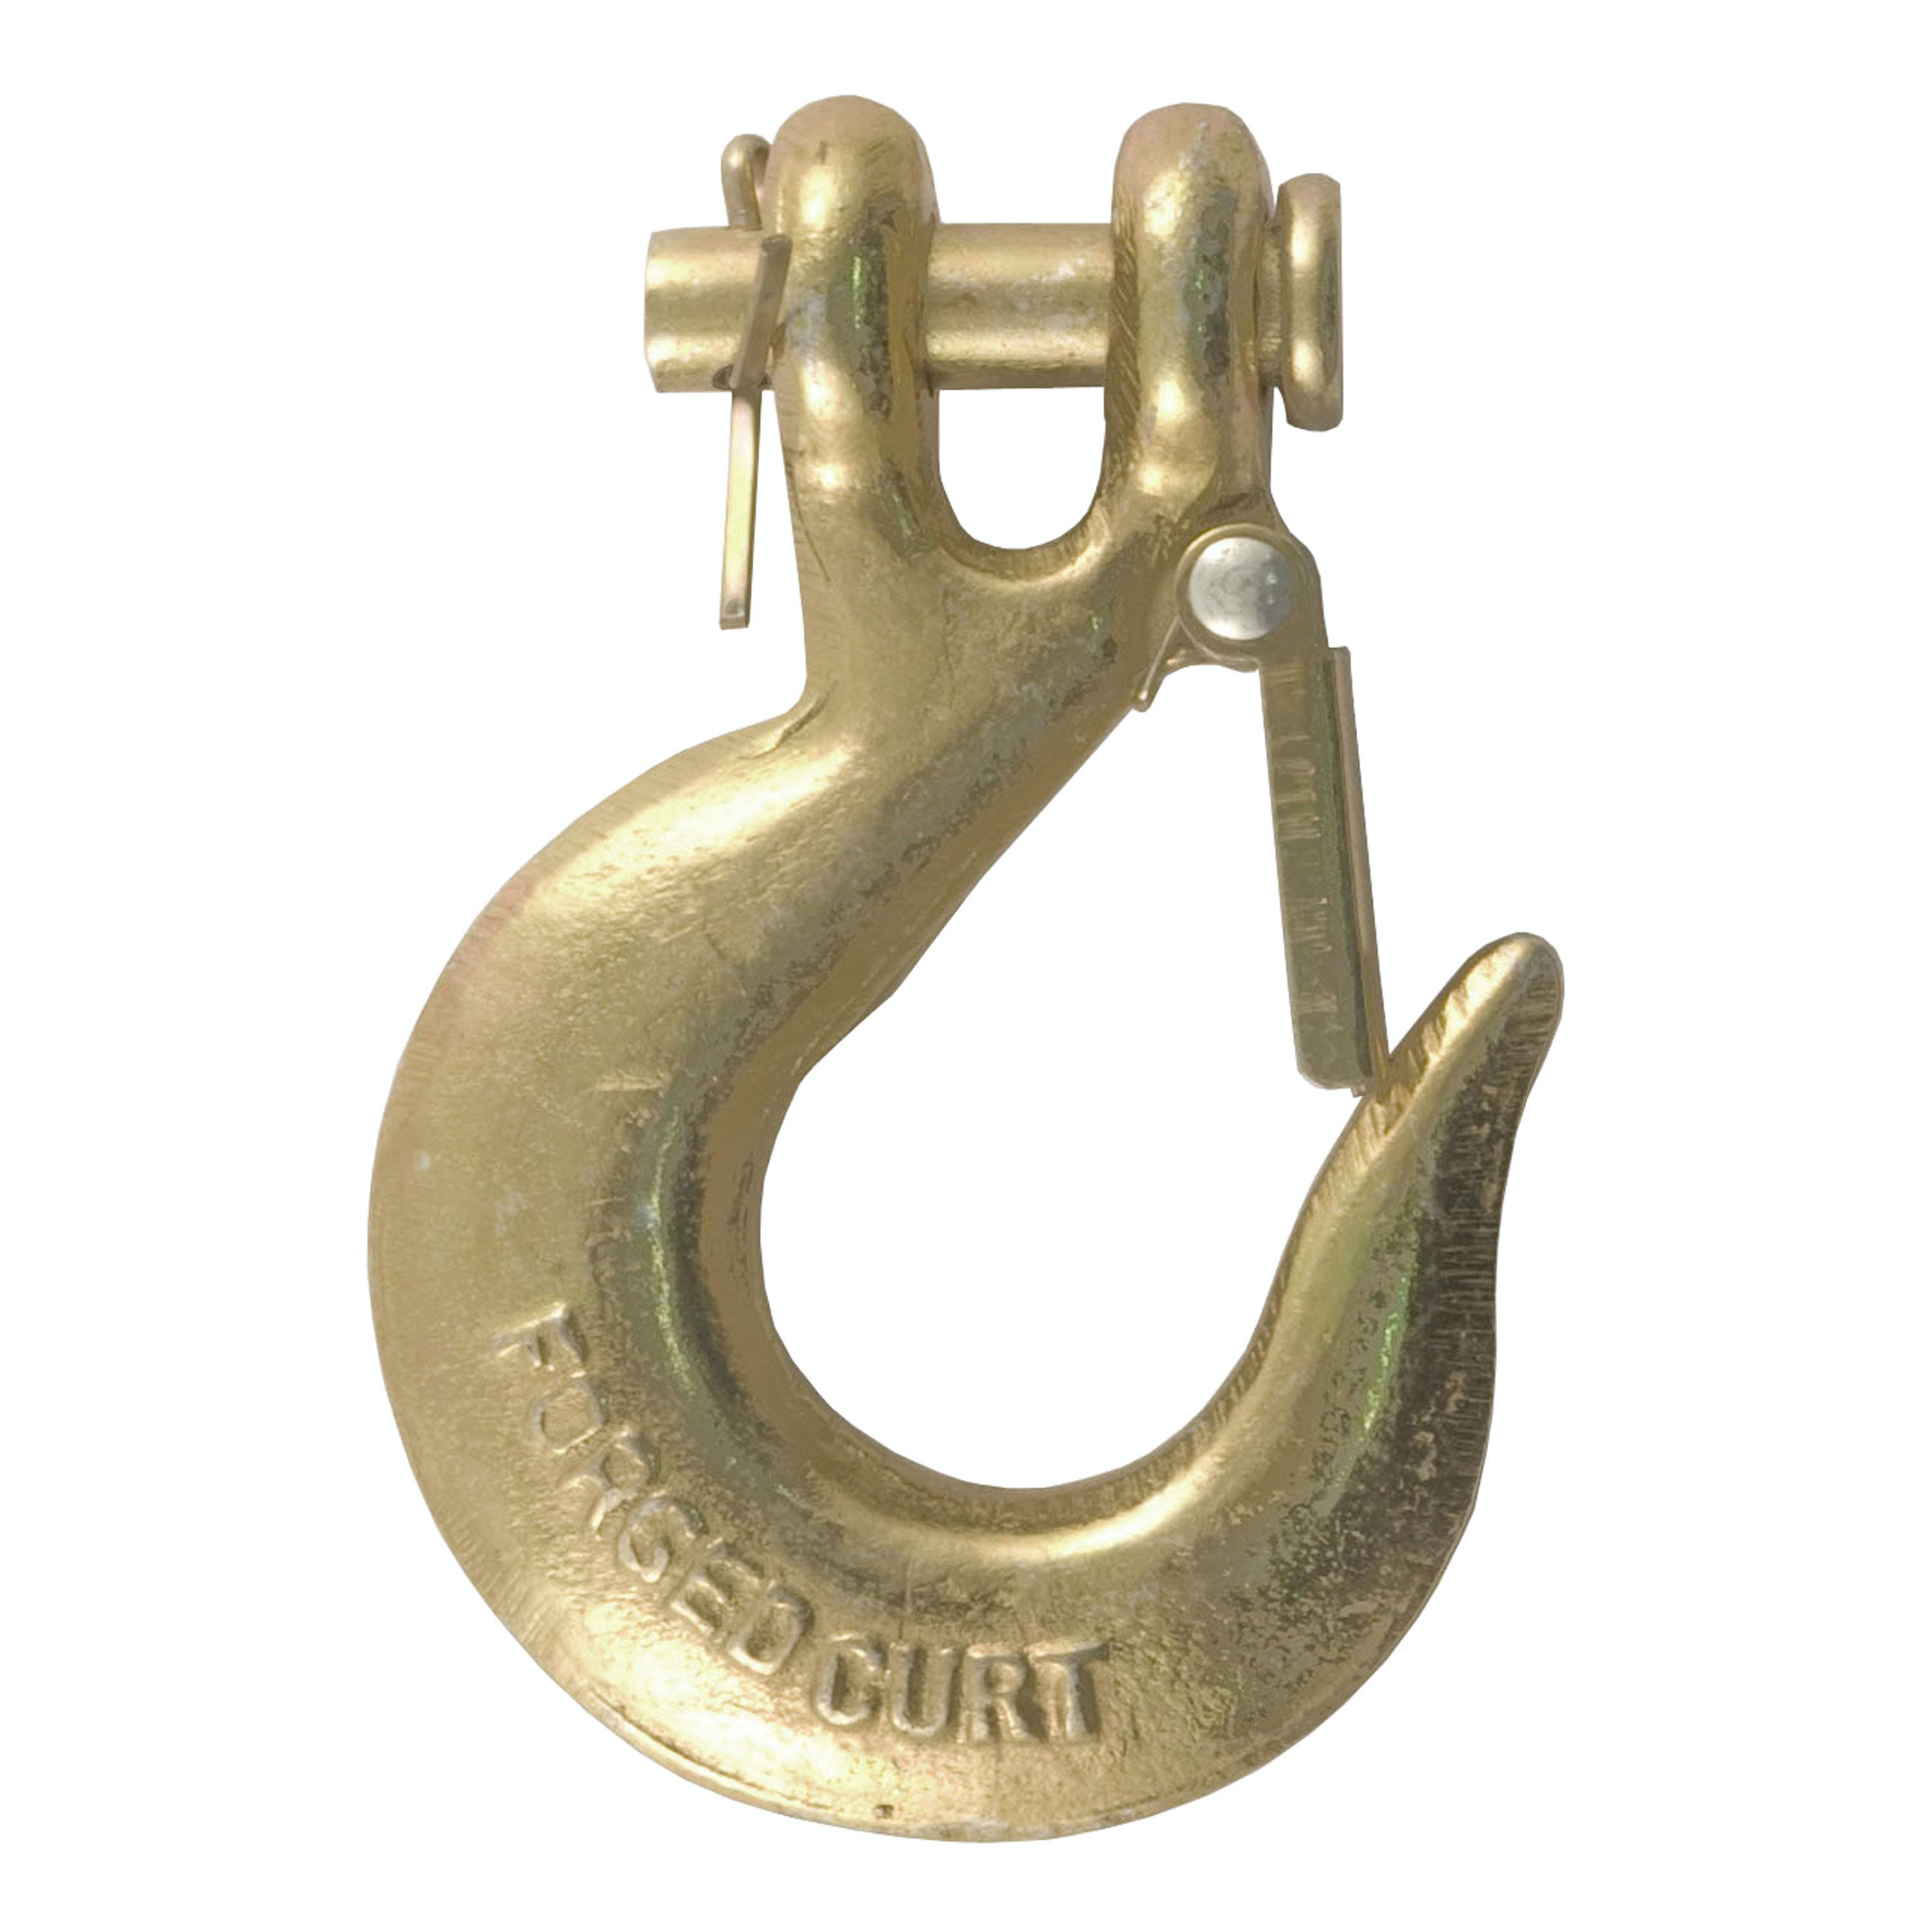 CURT 81940 1/4 Safety Latch Clevis Hook (12,600 lbs, 1/4 Pin)